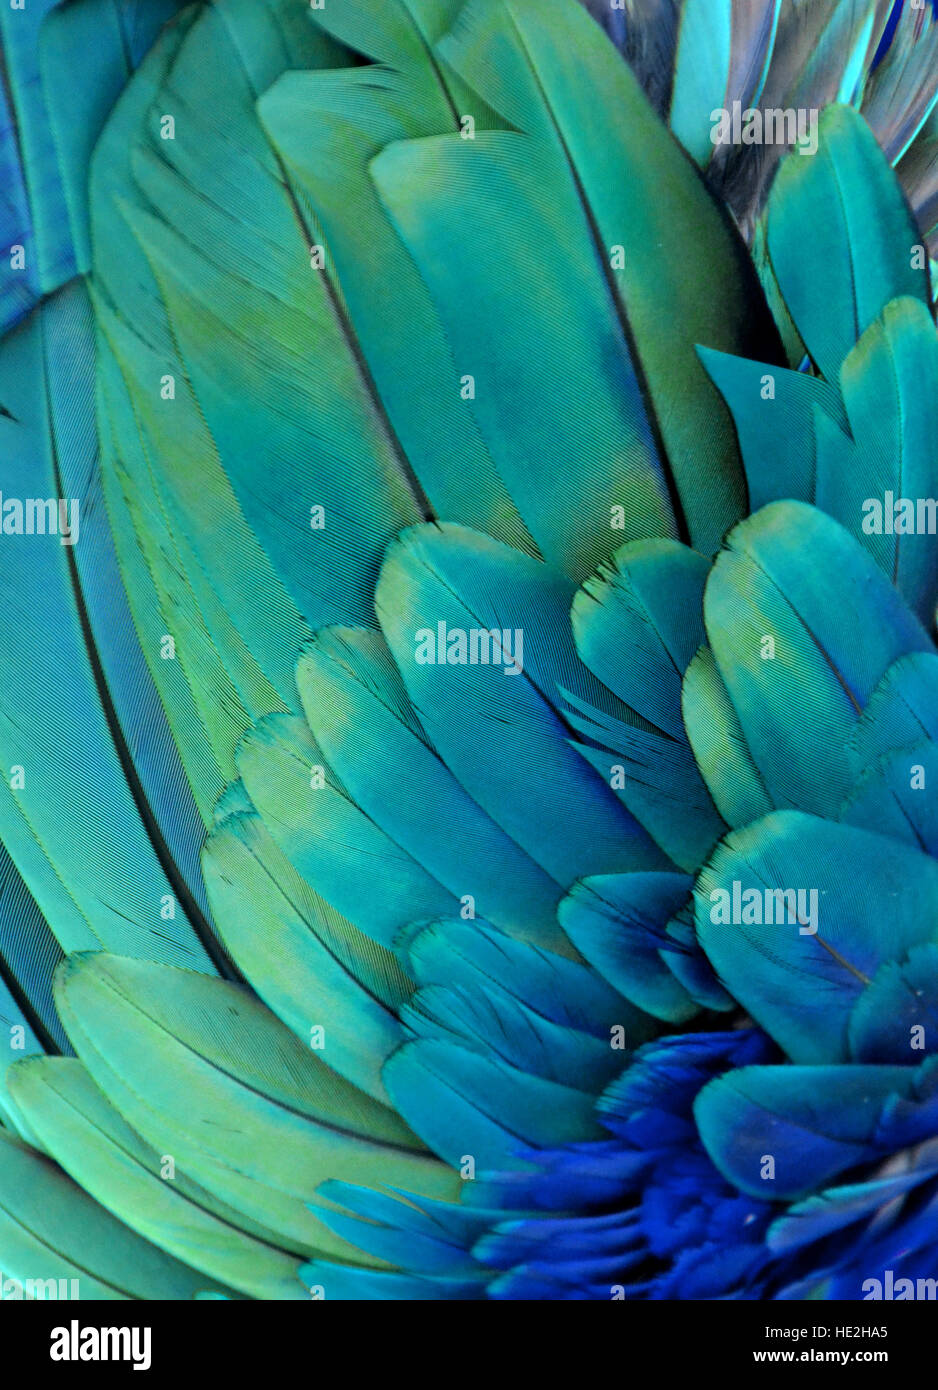 Blue and Green Macaw Feathers Stock Photo by ©MichaelFitzsimmons 77597126